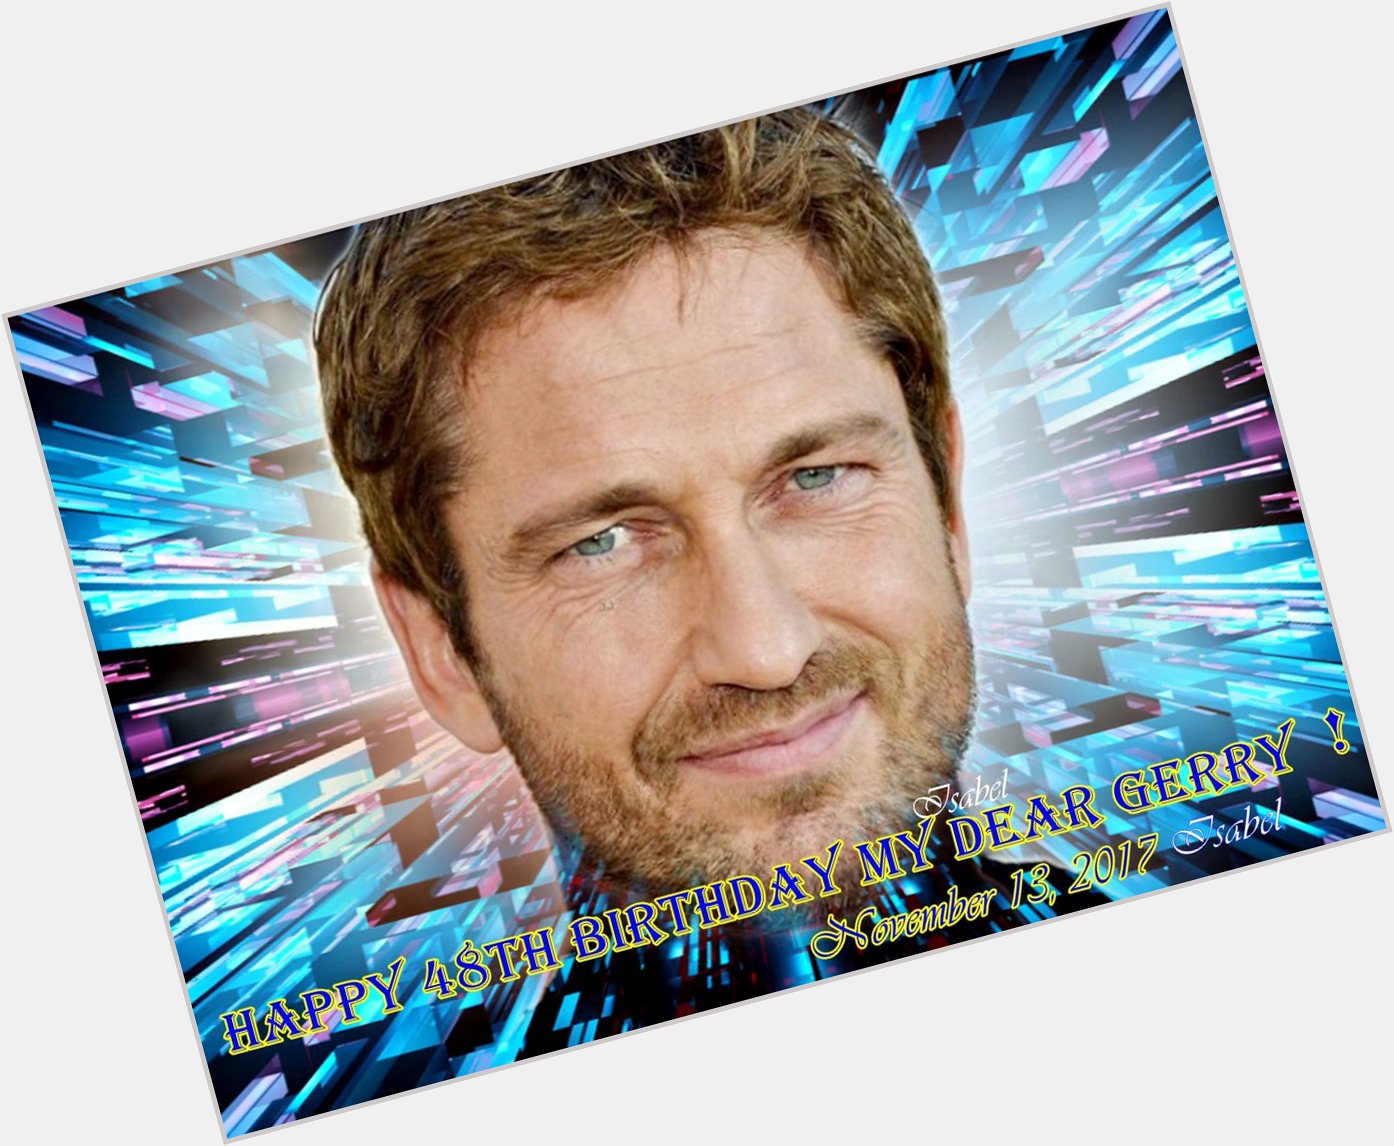 Very happy 48 birthday my admired and beloved Gerard Butler
I wish you all the best in the world. 